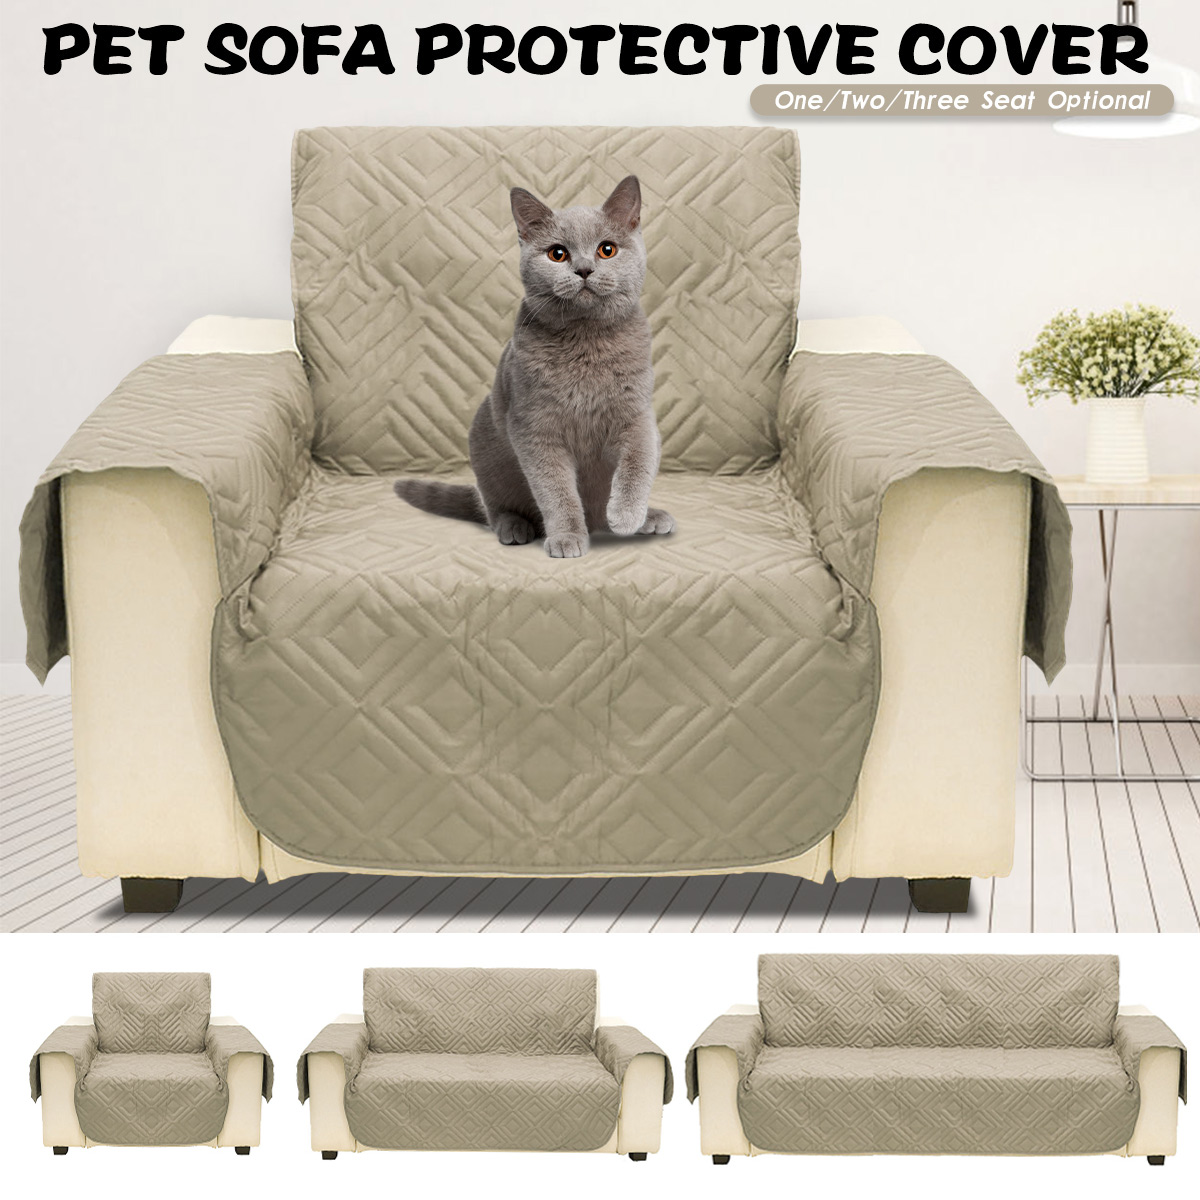 Microfiber-Pet-Dog-Kids-Couch-Sofa-Furniture-Protector-Cover-Strap-Waterproof-Chair-Covers-1502228-1